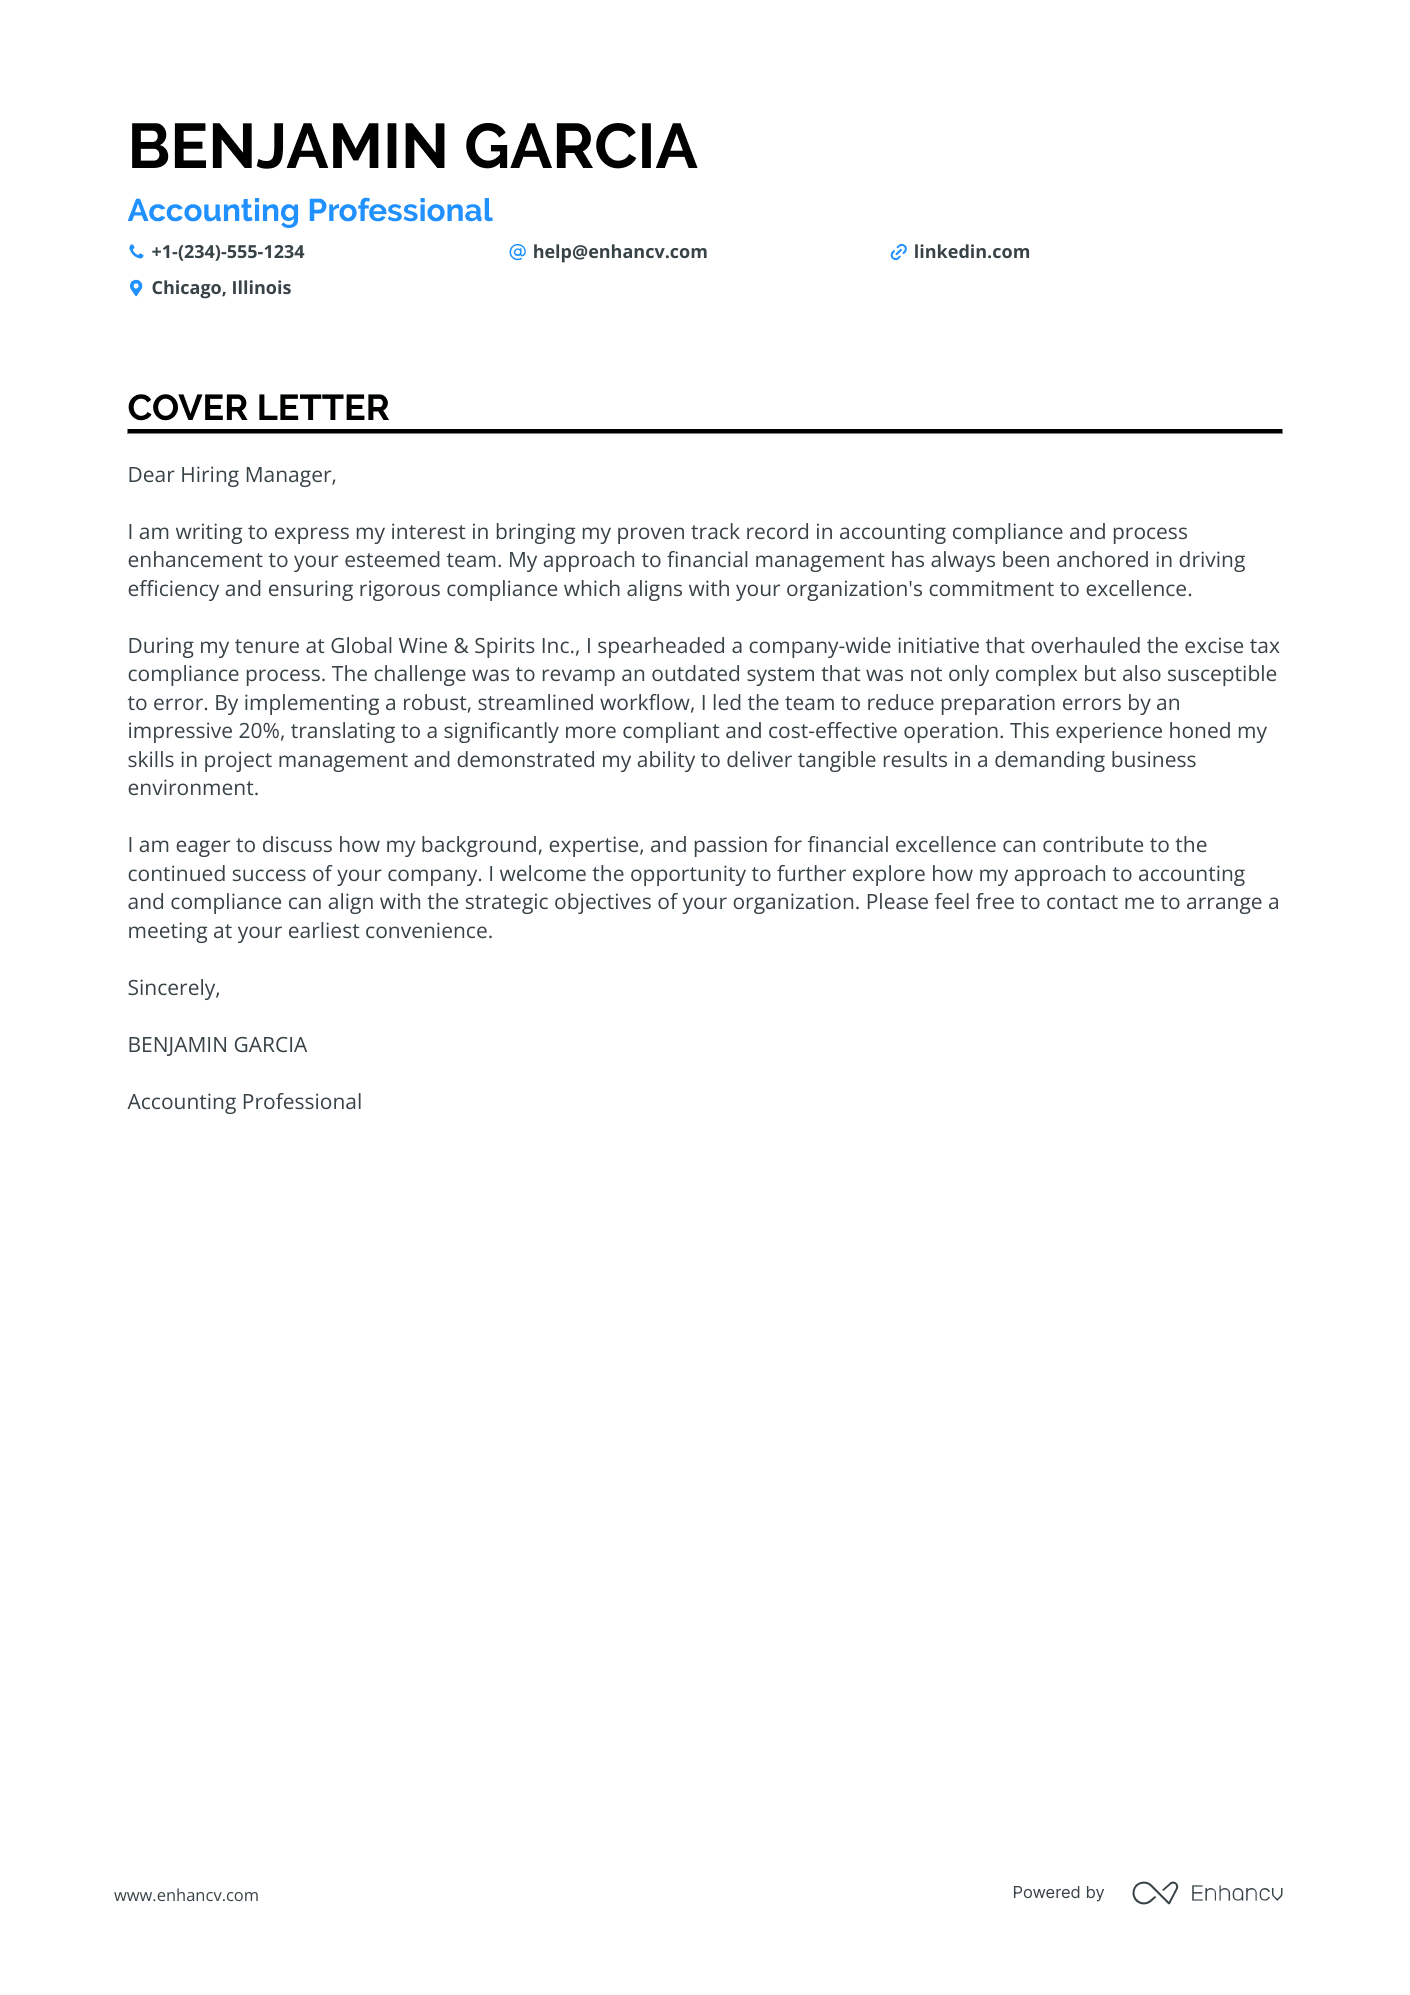 Accounting Assistant cover letter